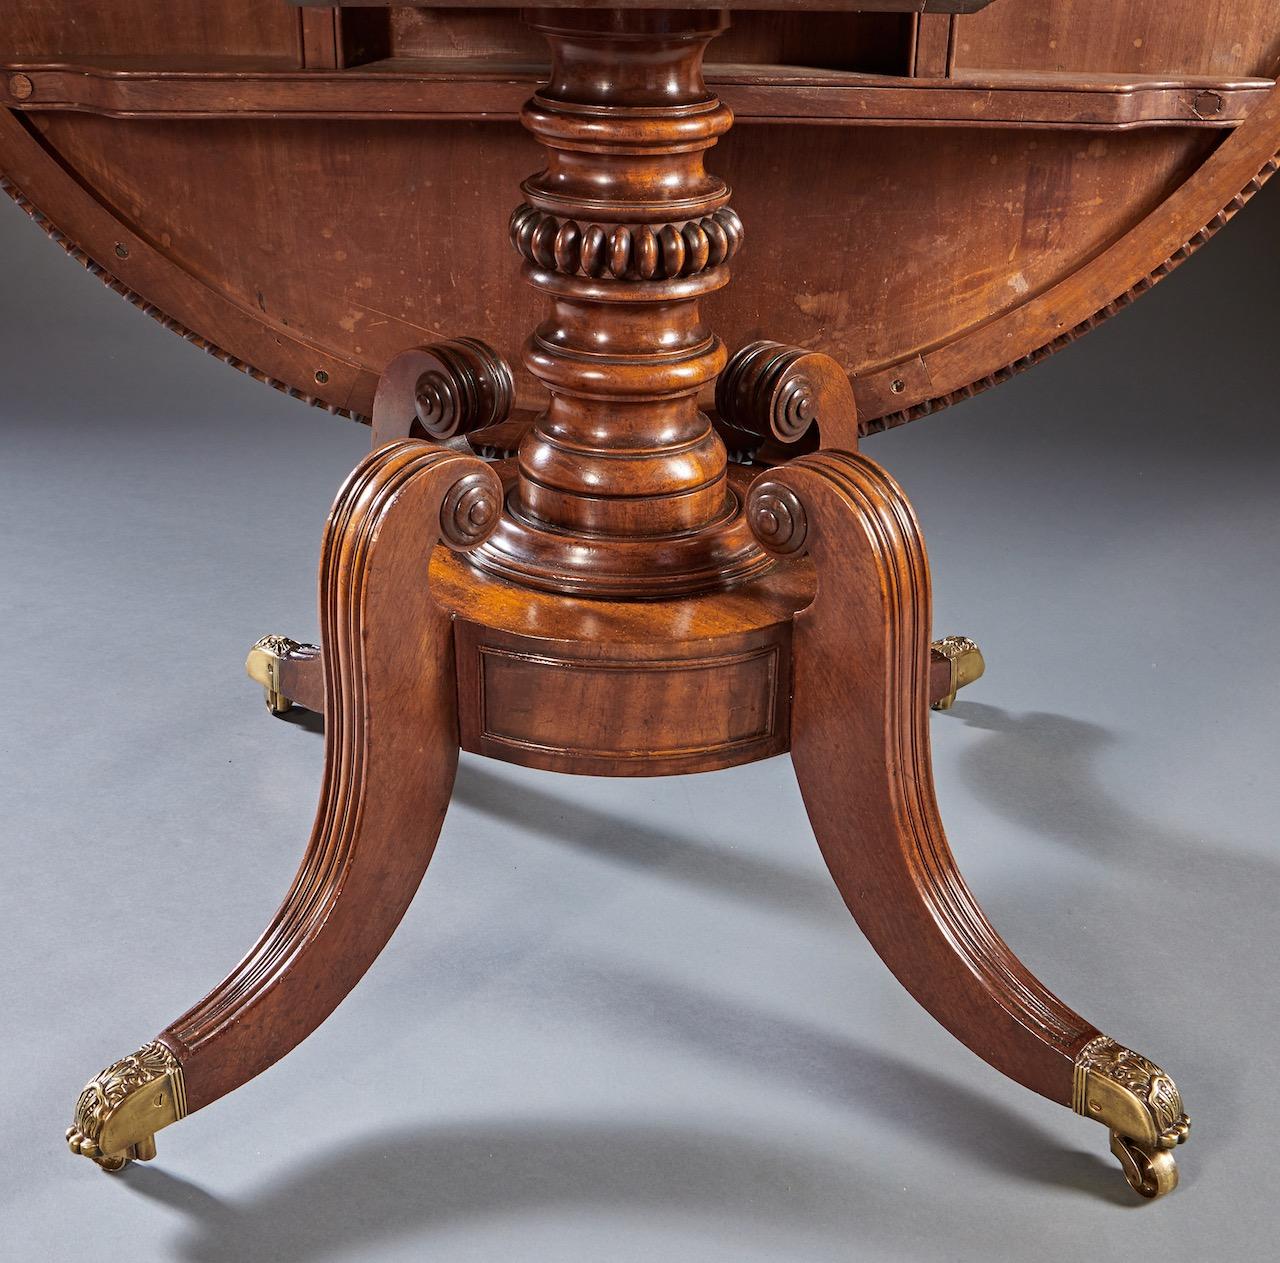 Early 19th Century 19th Century  English George IV Period Mahogany Carved and Inlaid Center Table For Sale